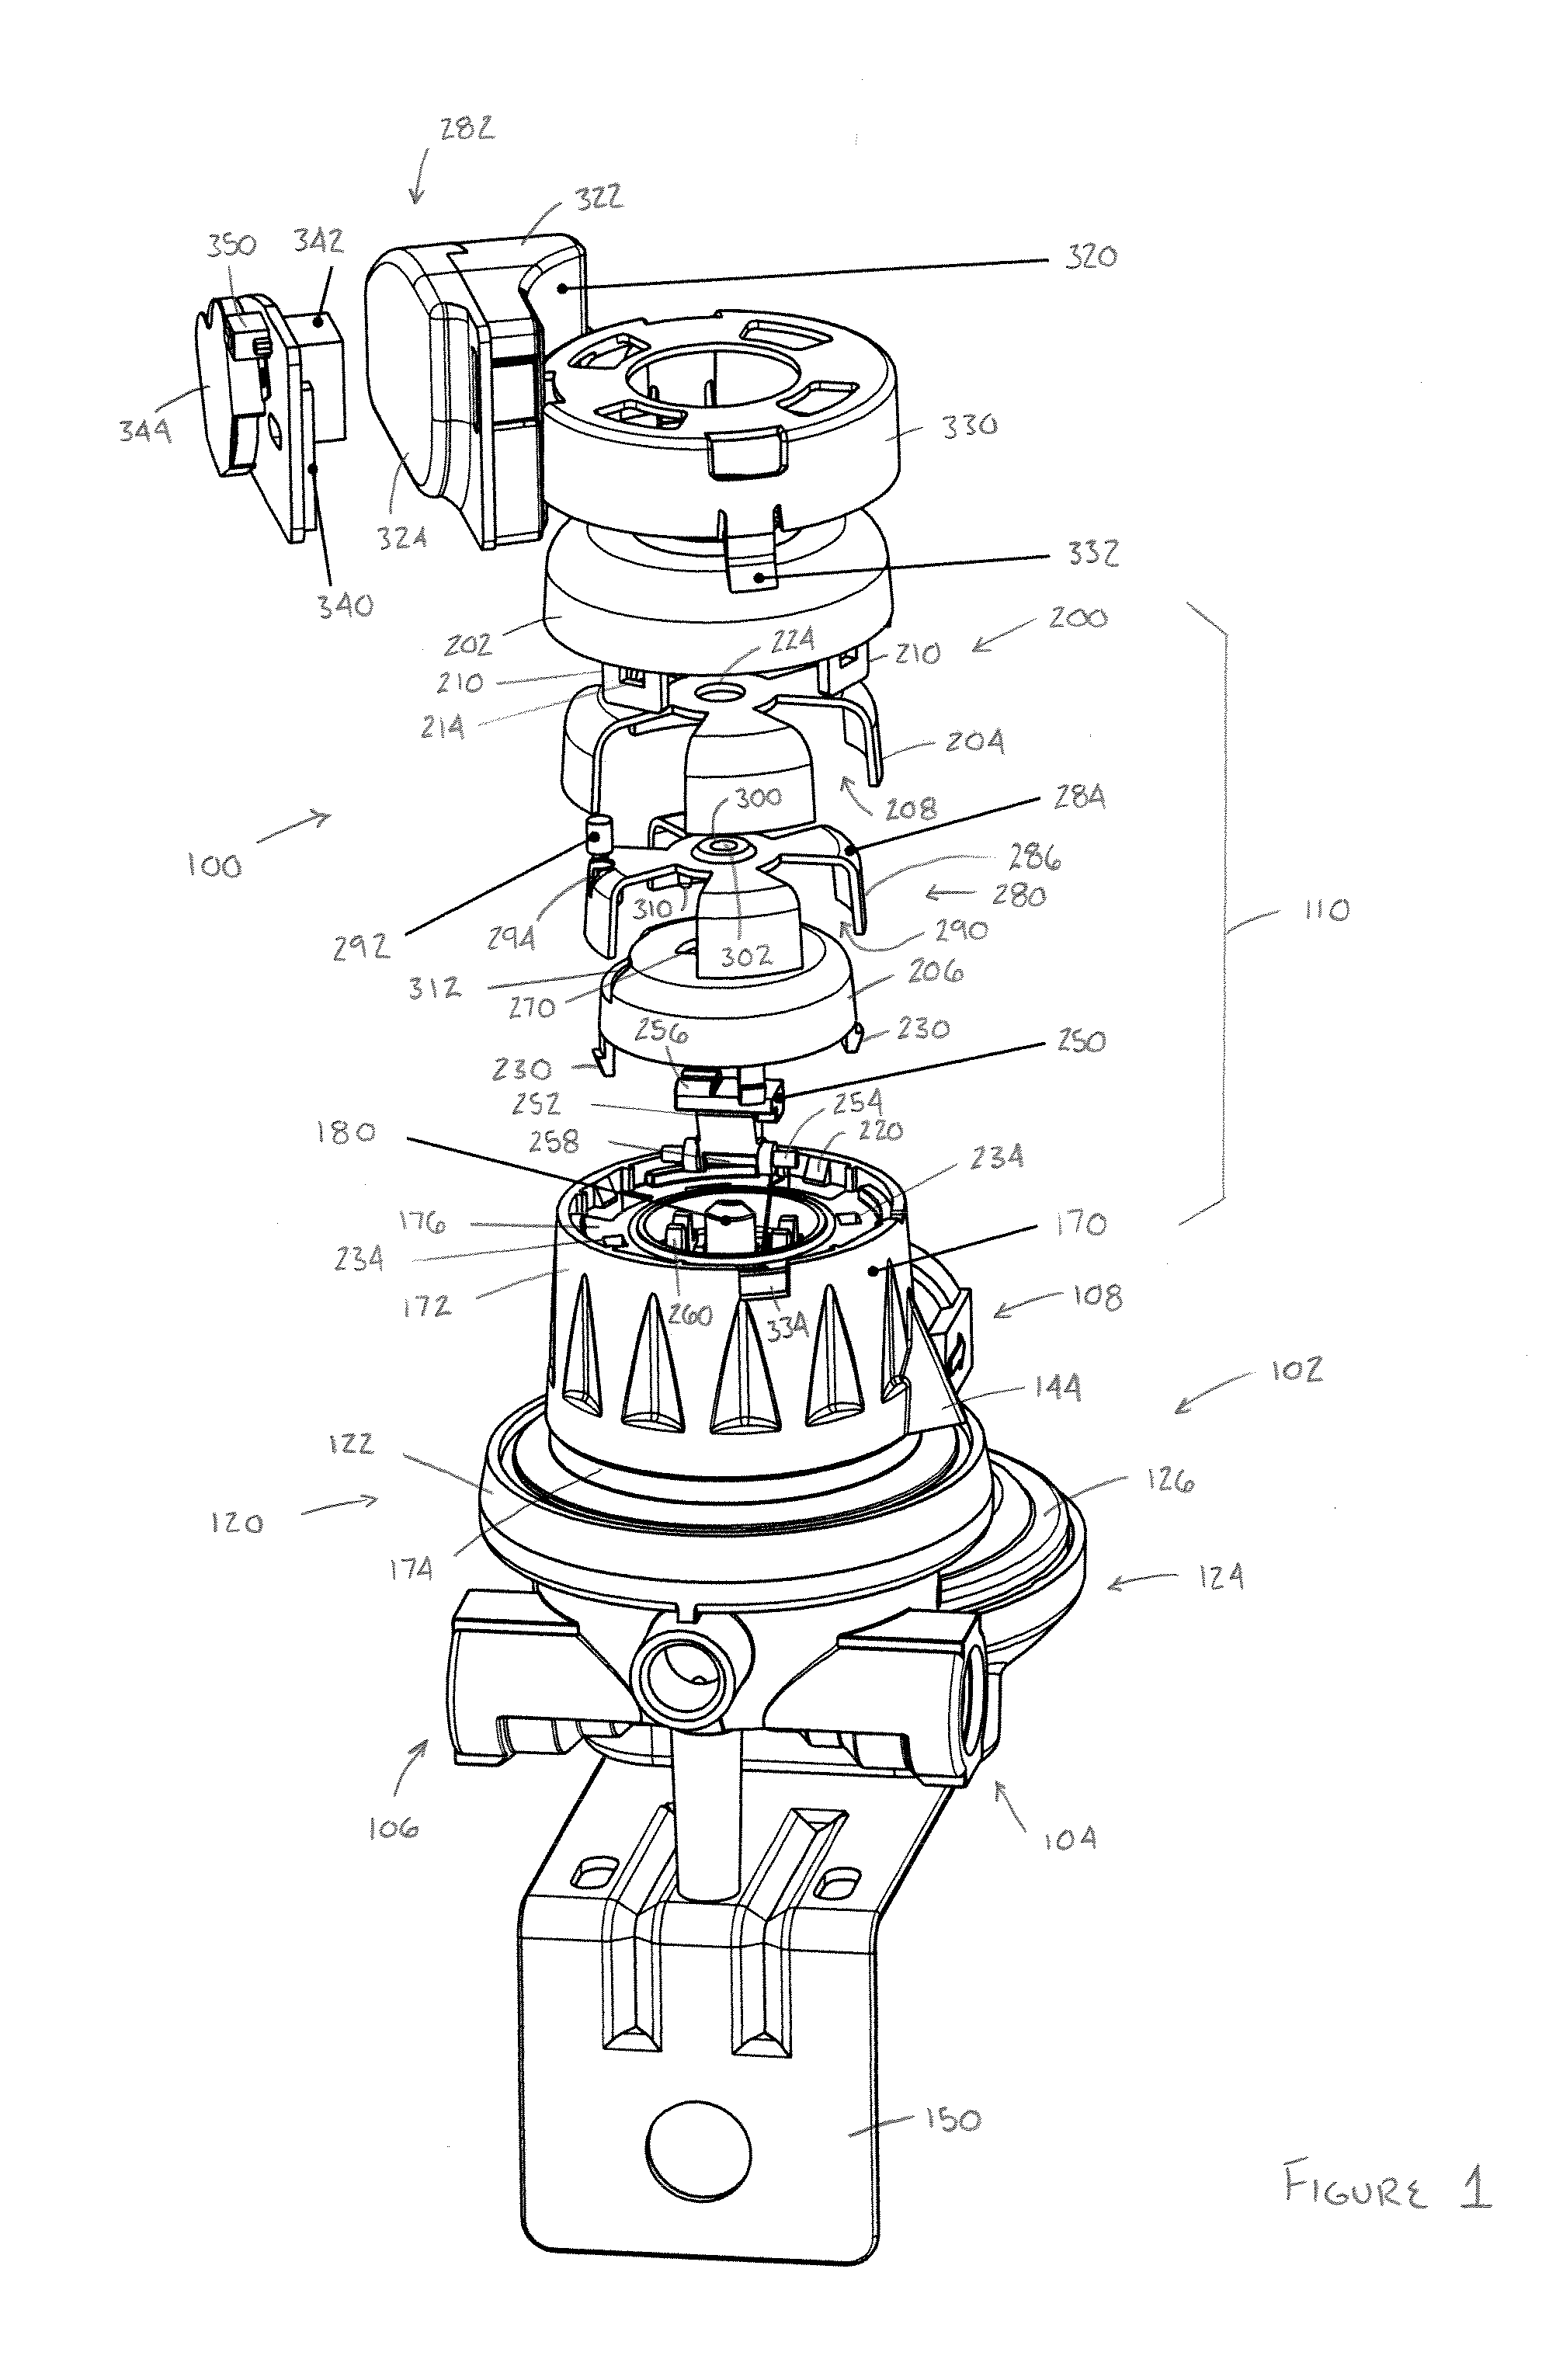 Automatic switching valve with alarm